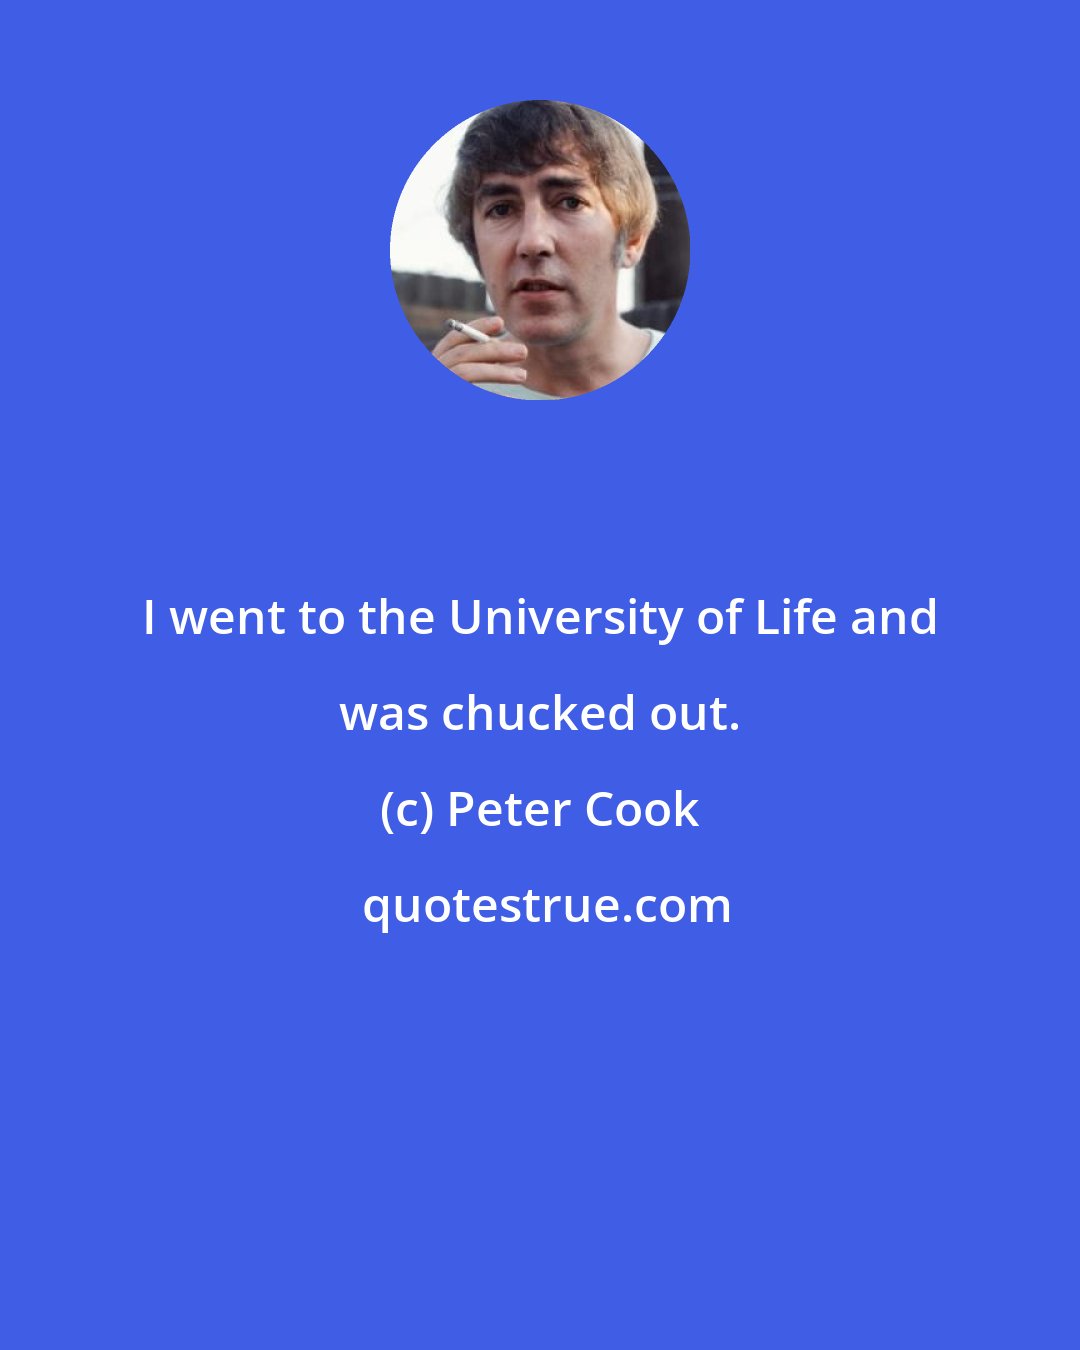 Peter Cook: I went to the University of Life and was chucked out.